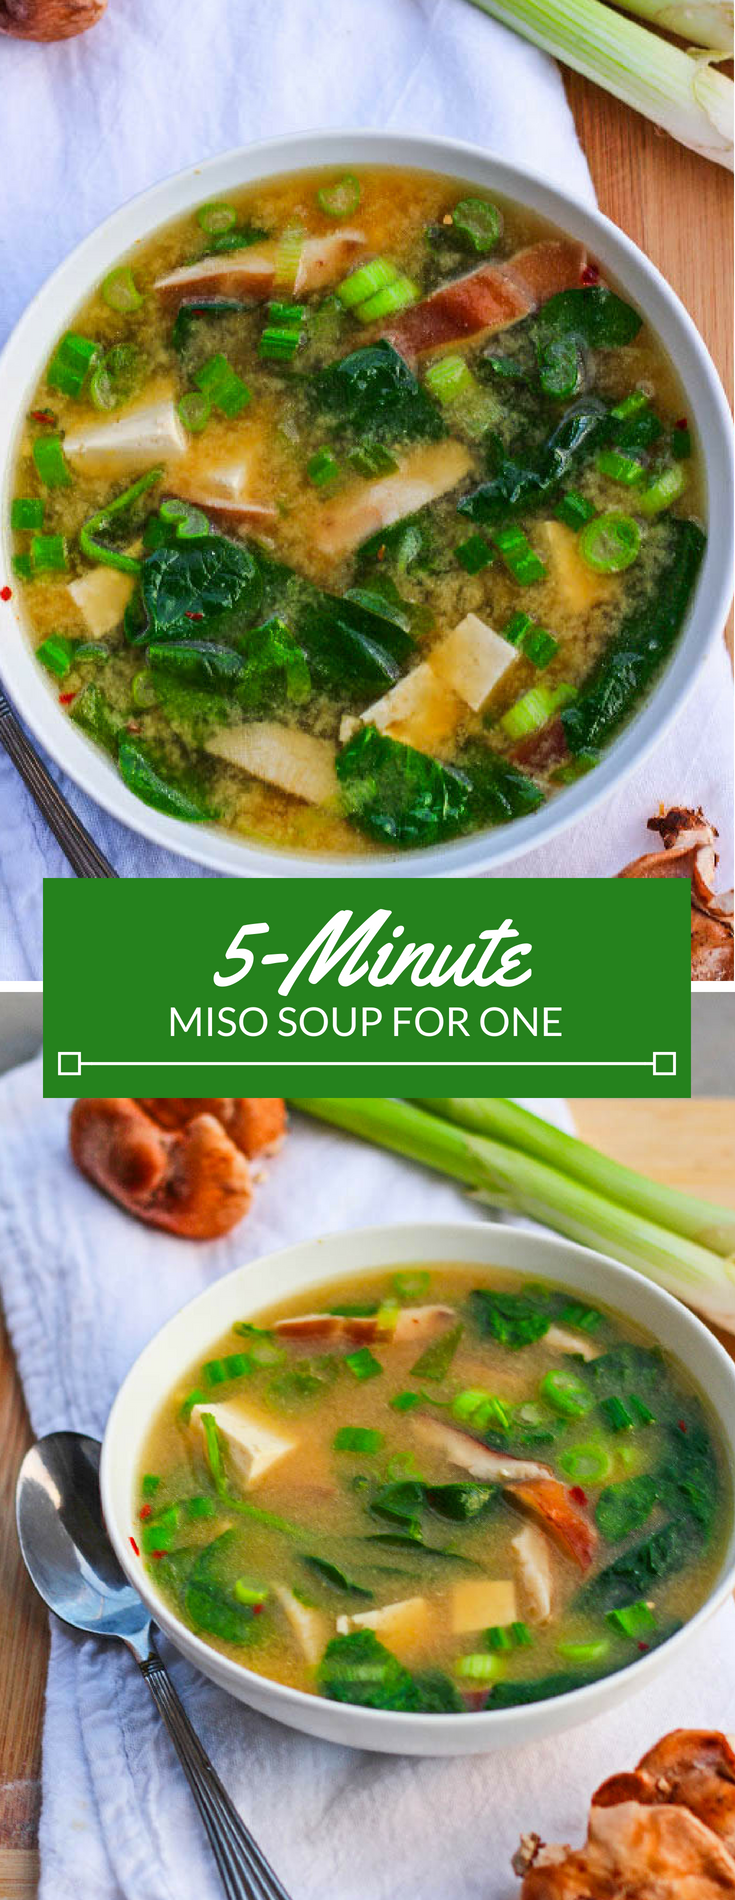 5 Minute Miso Soup for One